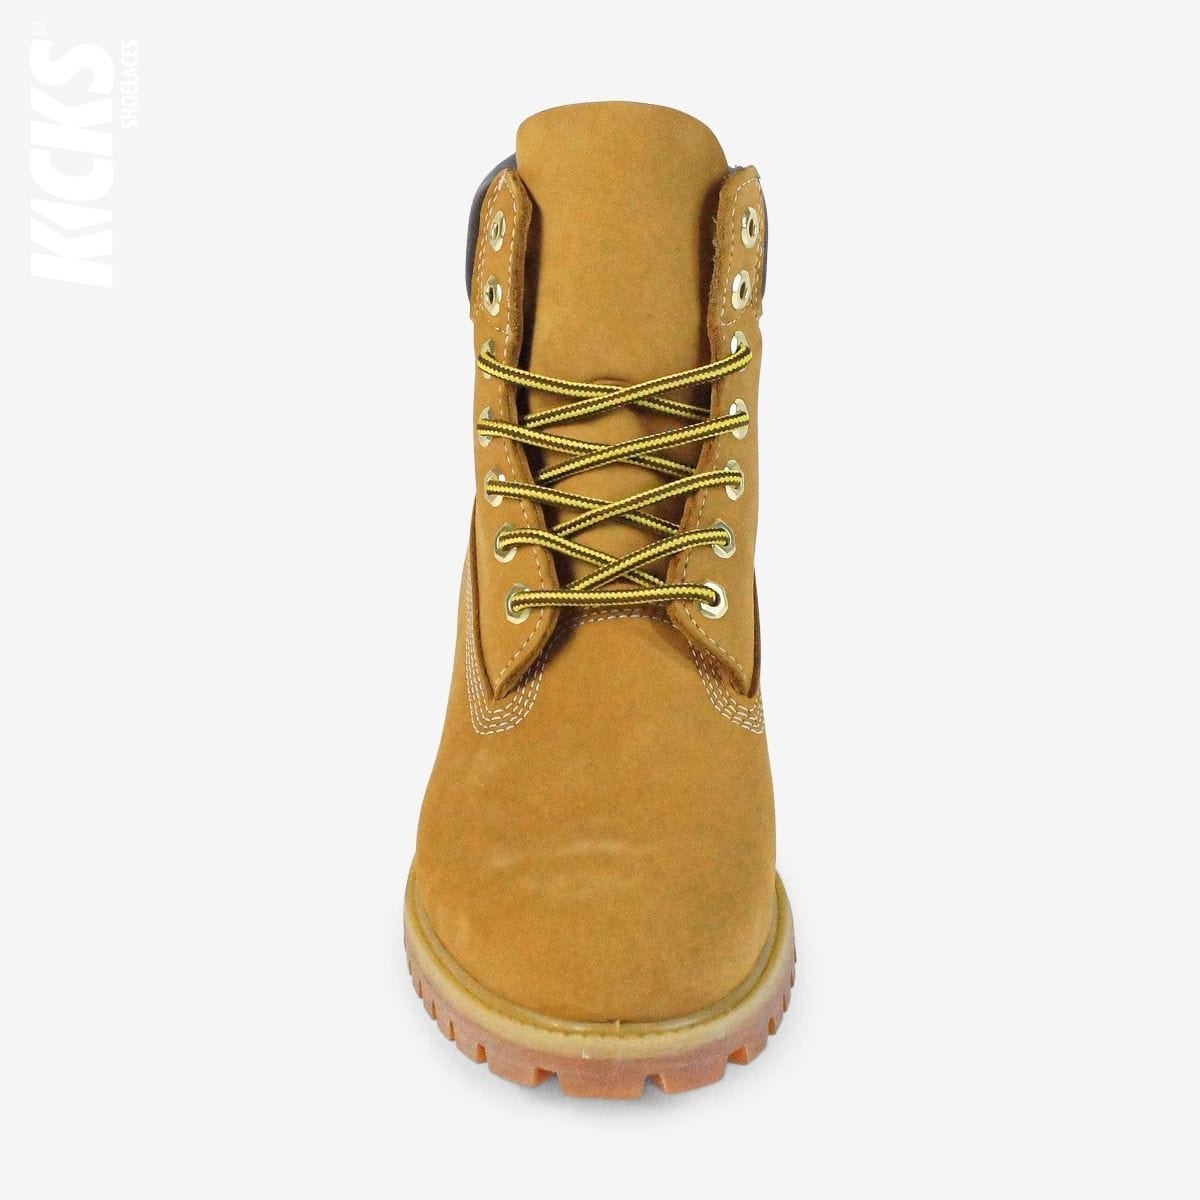 yellow-and-brown-boot-laces-for-adult-kids-unisex